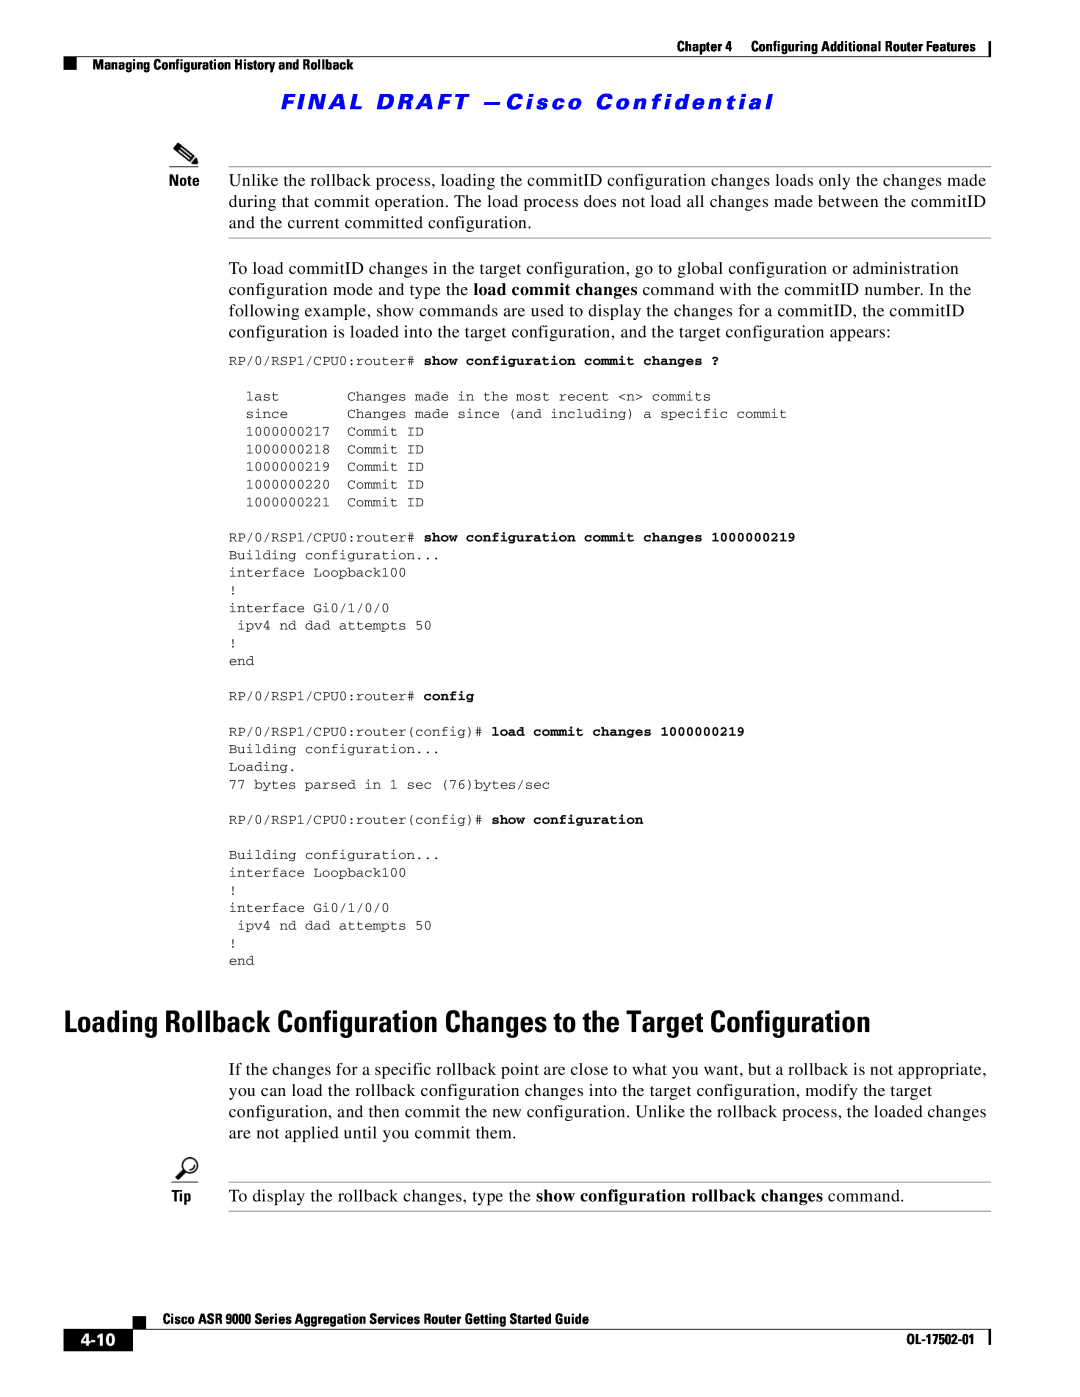 Cisco Systems A9KMOD80TR, ASR 9000, A9K24X10GETR Loading Rollback Configuration Changes to the Target Configuration, 4-10 